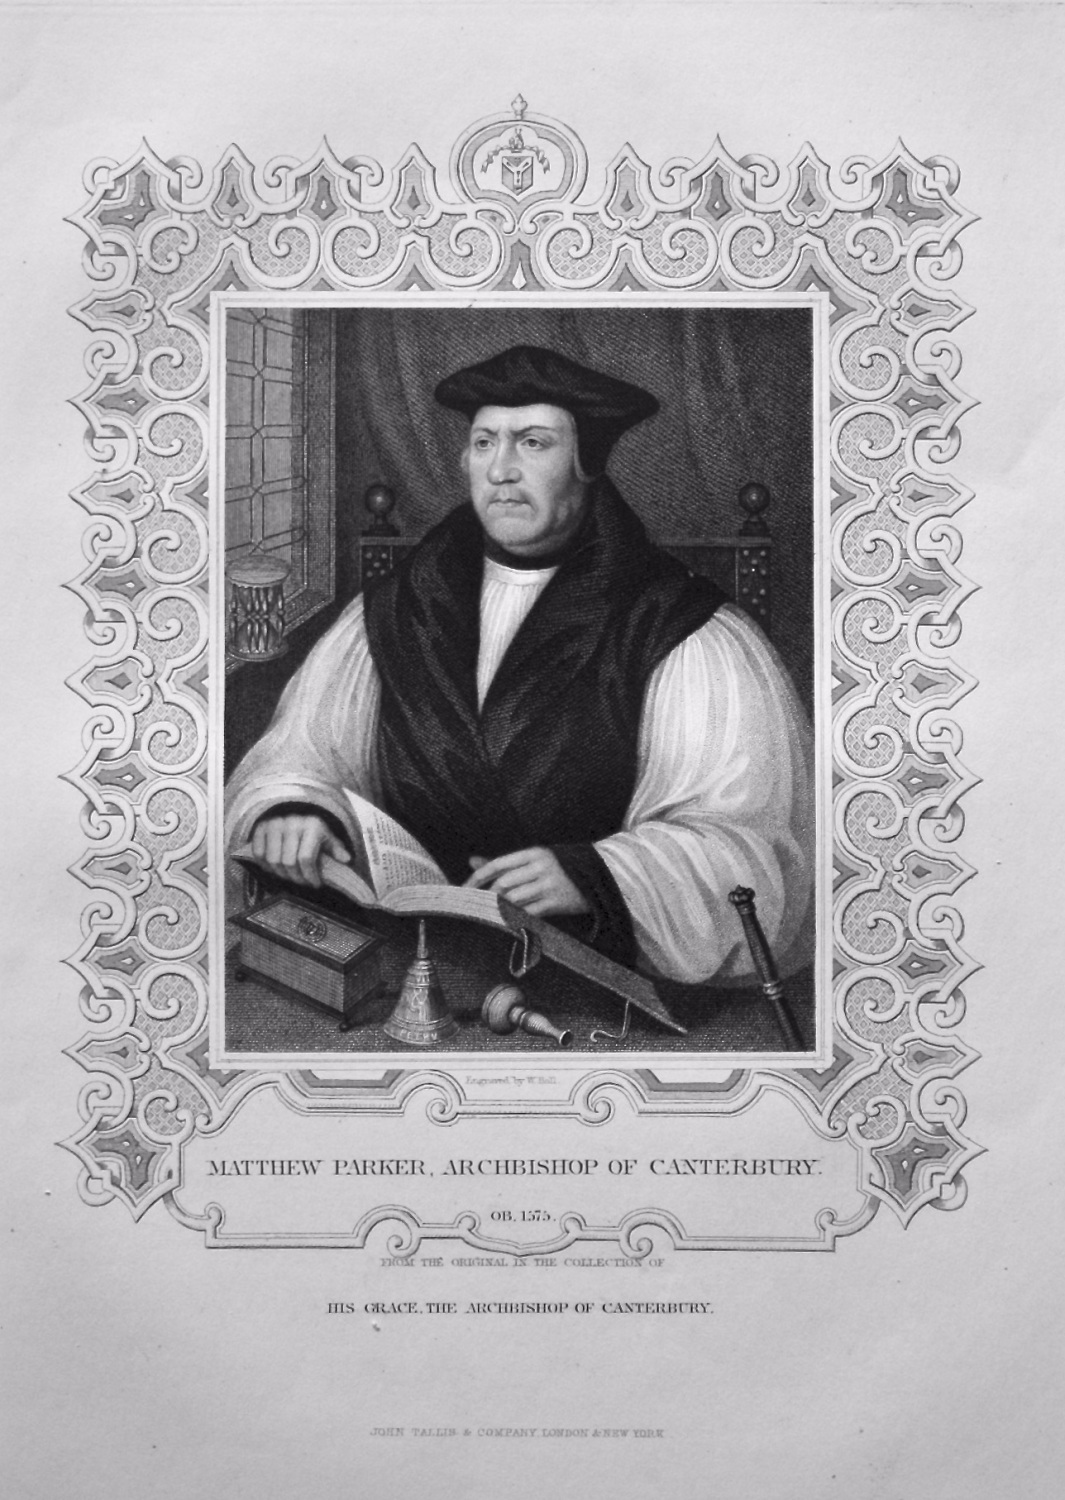 Matthew Parker, Archbishop of Canterbury.  OB. 1575.  From the original in 